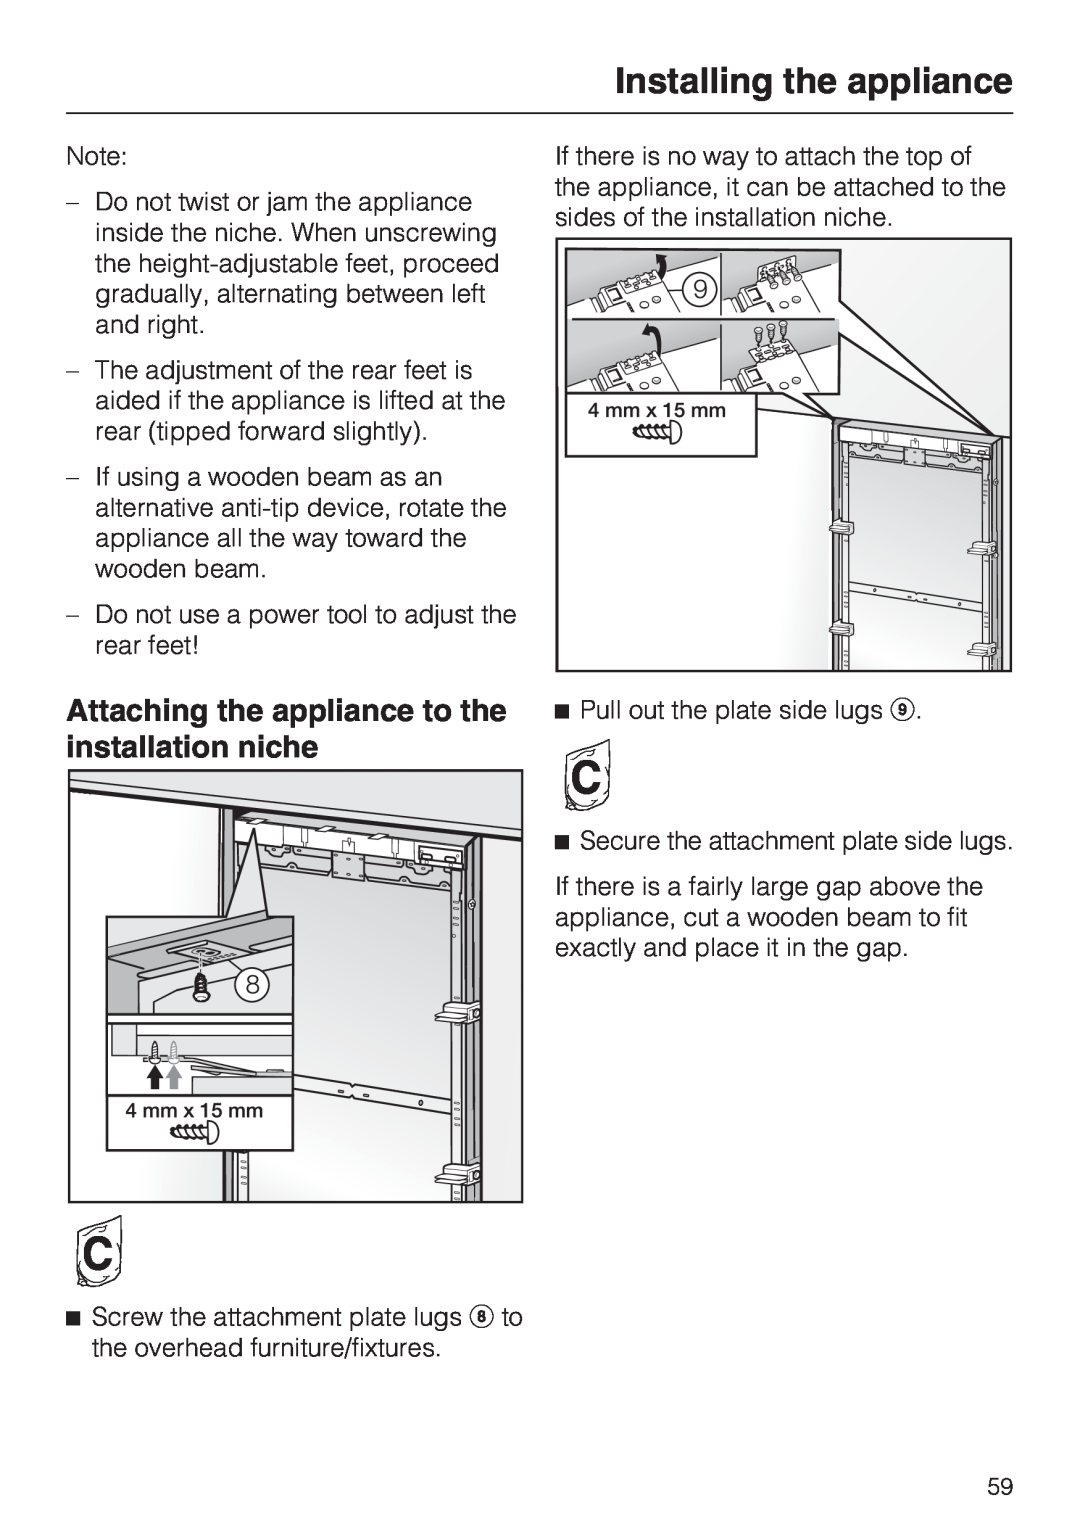 Miele F1411VI installation instructions Attaching the appliance to the installation niche, Installing the appliance 